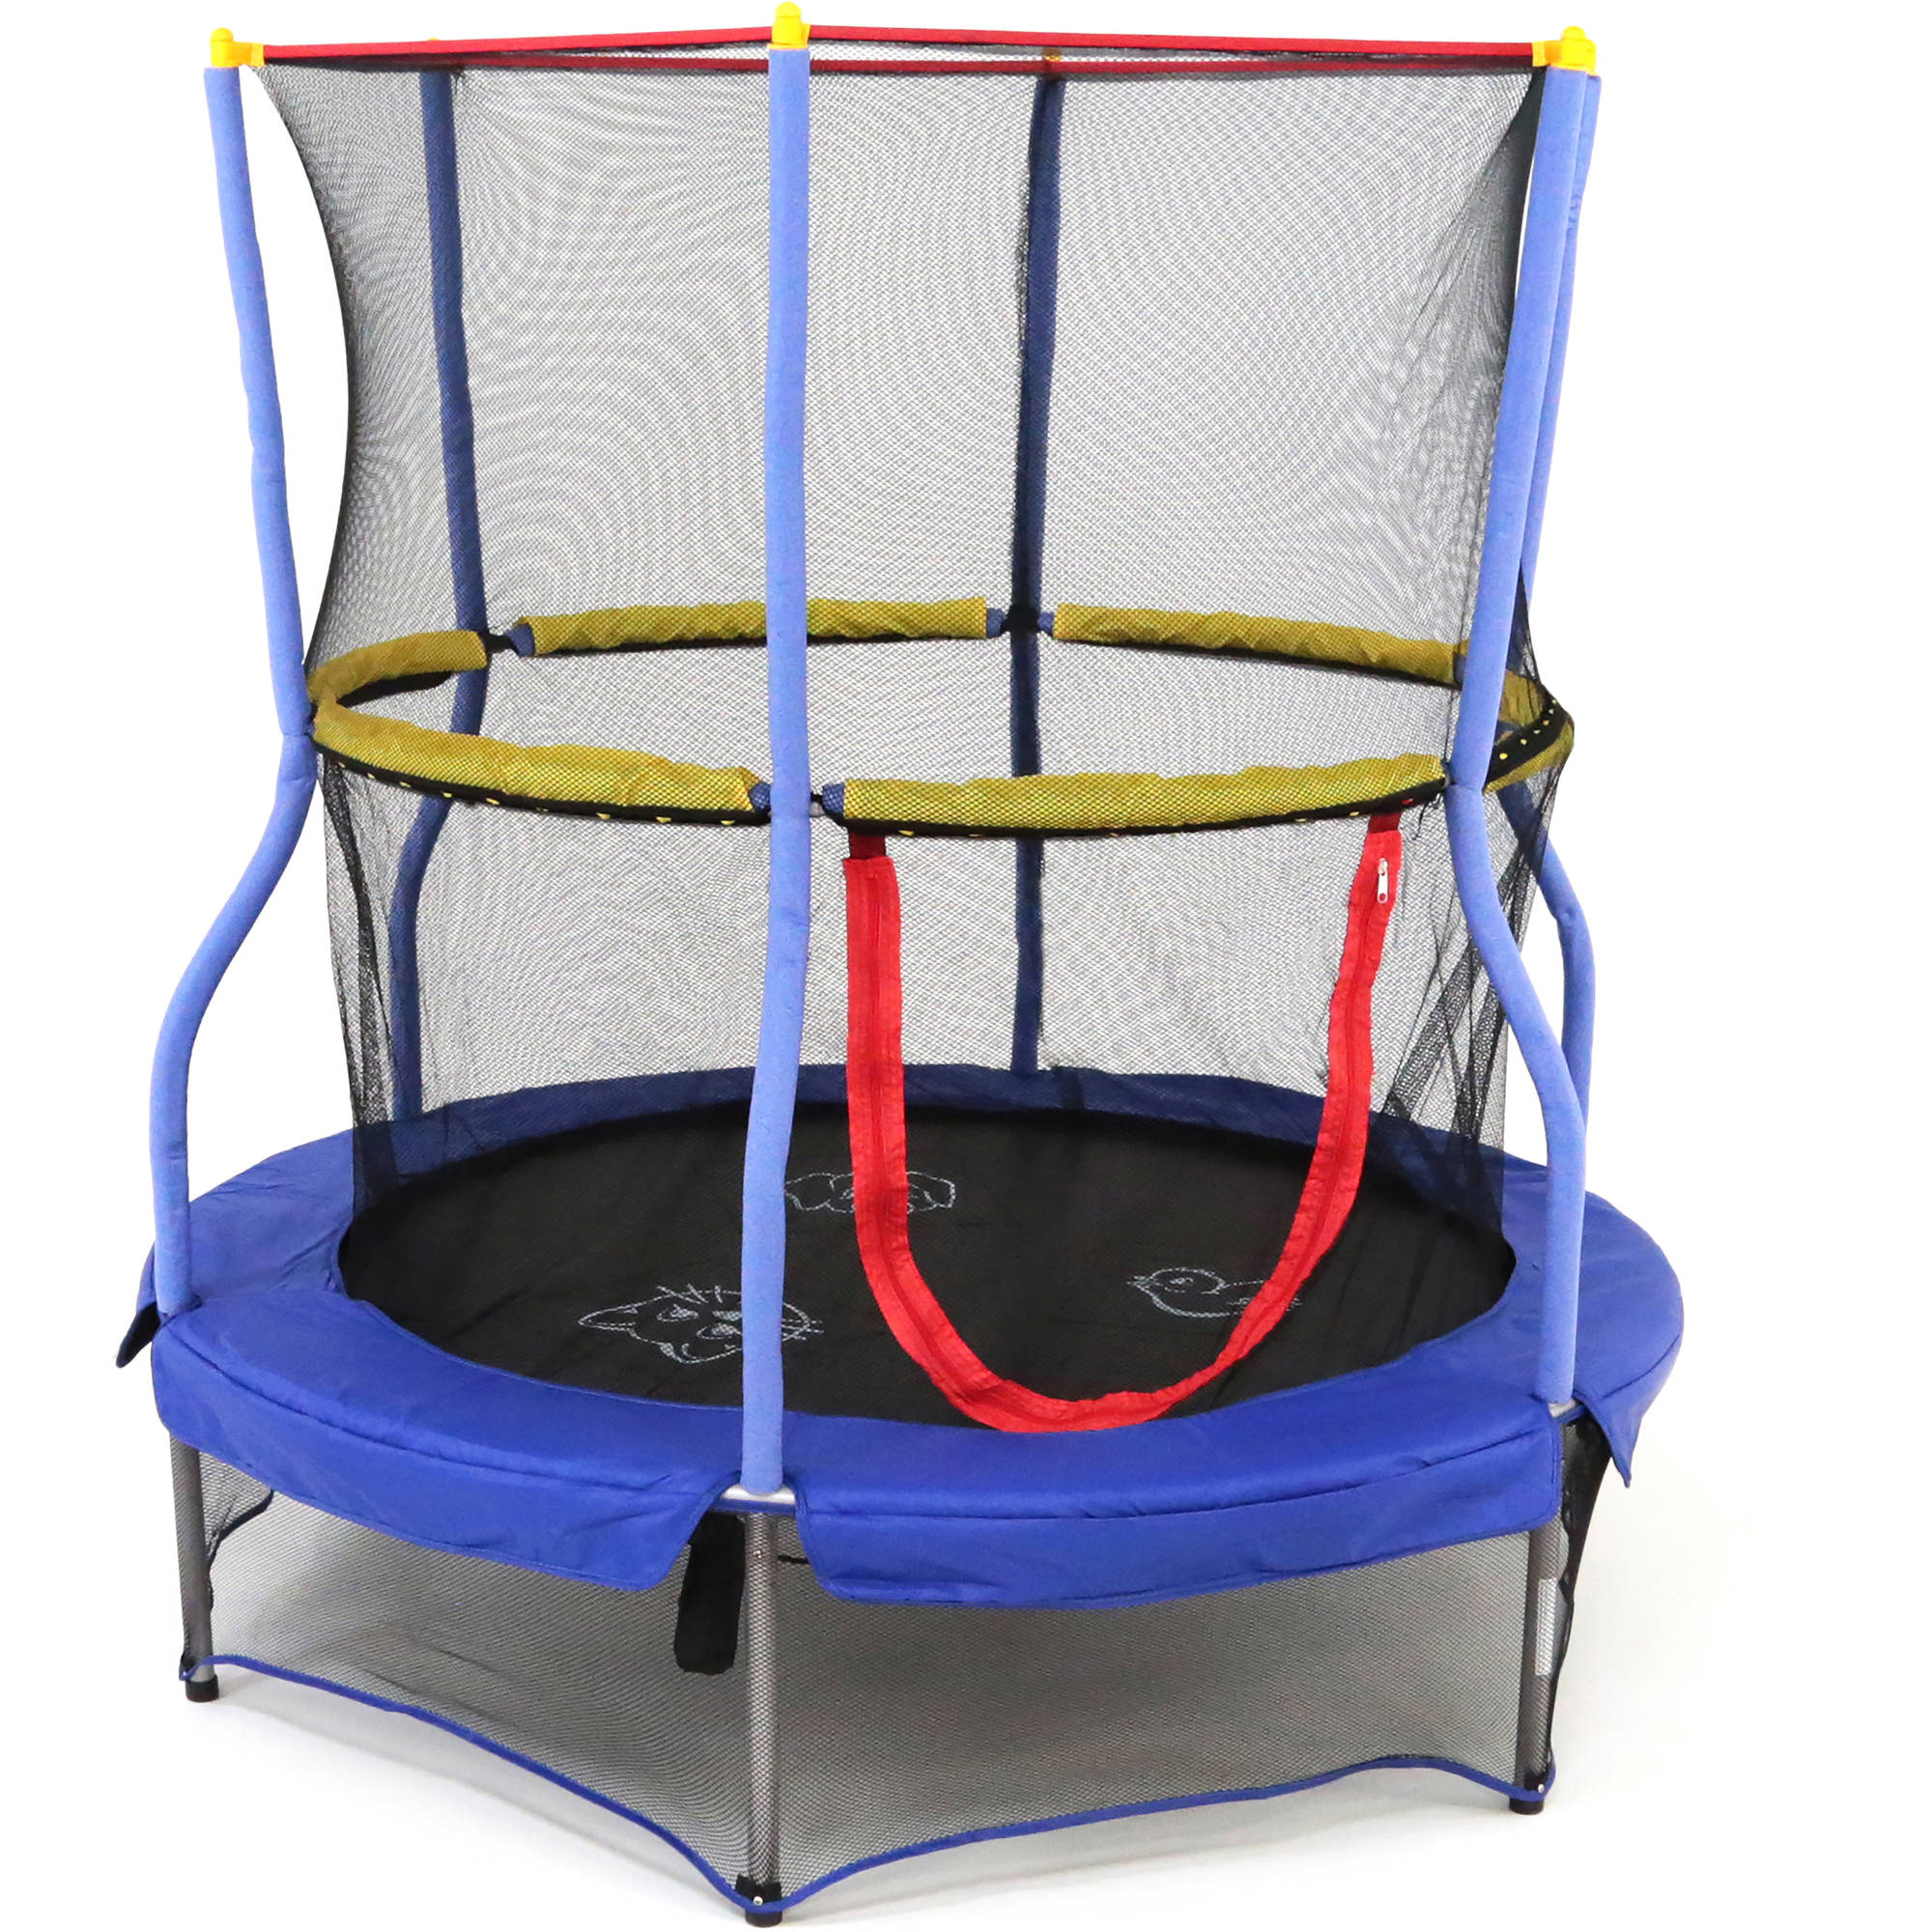 Skywalker Trampolines 55-Inch Bounce-N-Learn Trampoline, with Enclosure and Sound, Blue - image 1 of 11